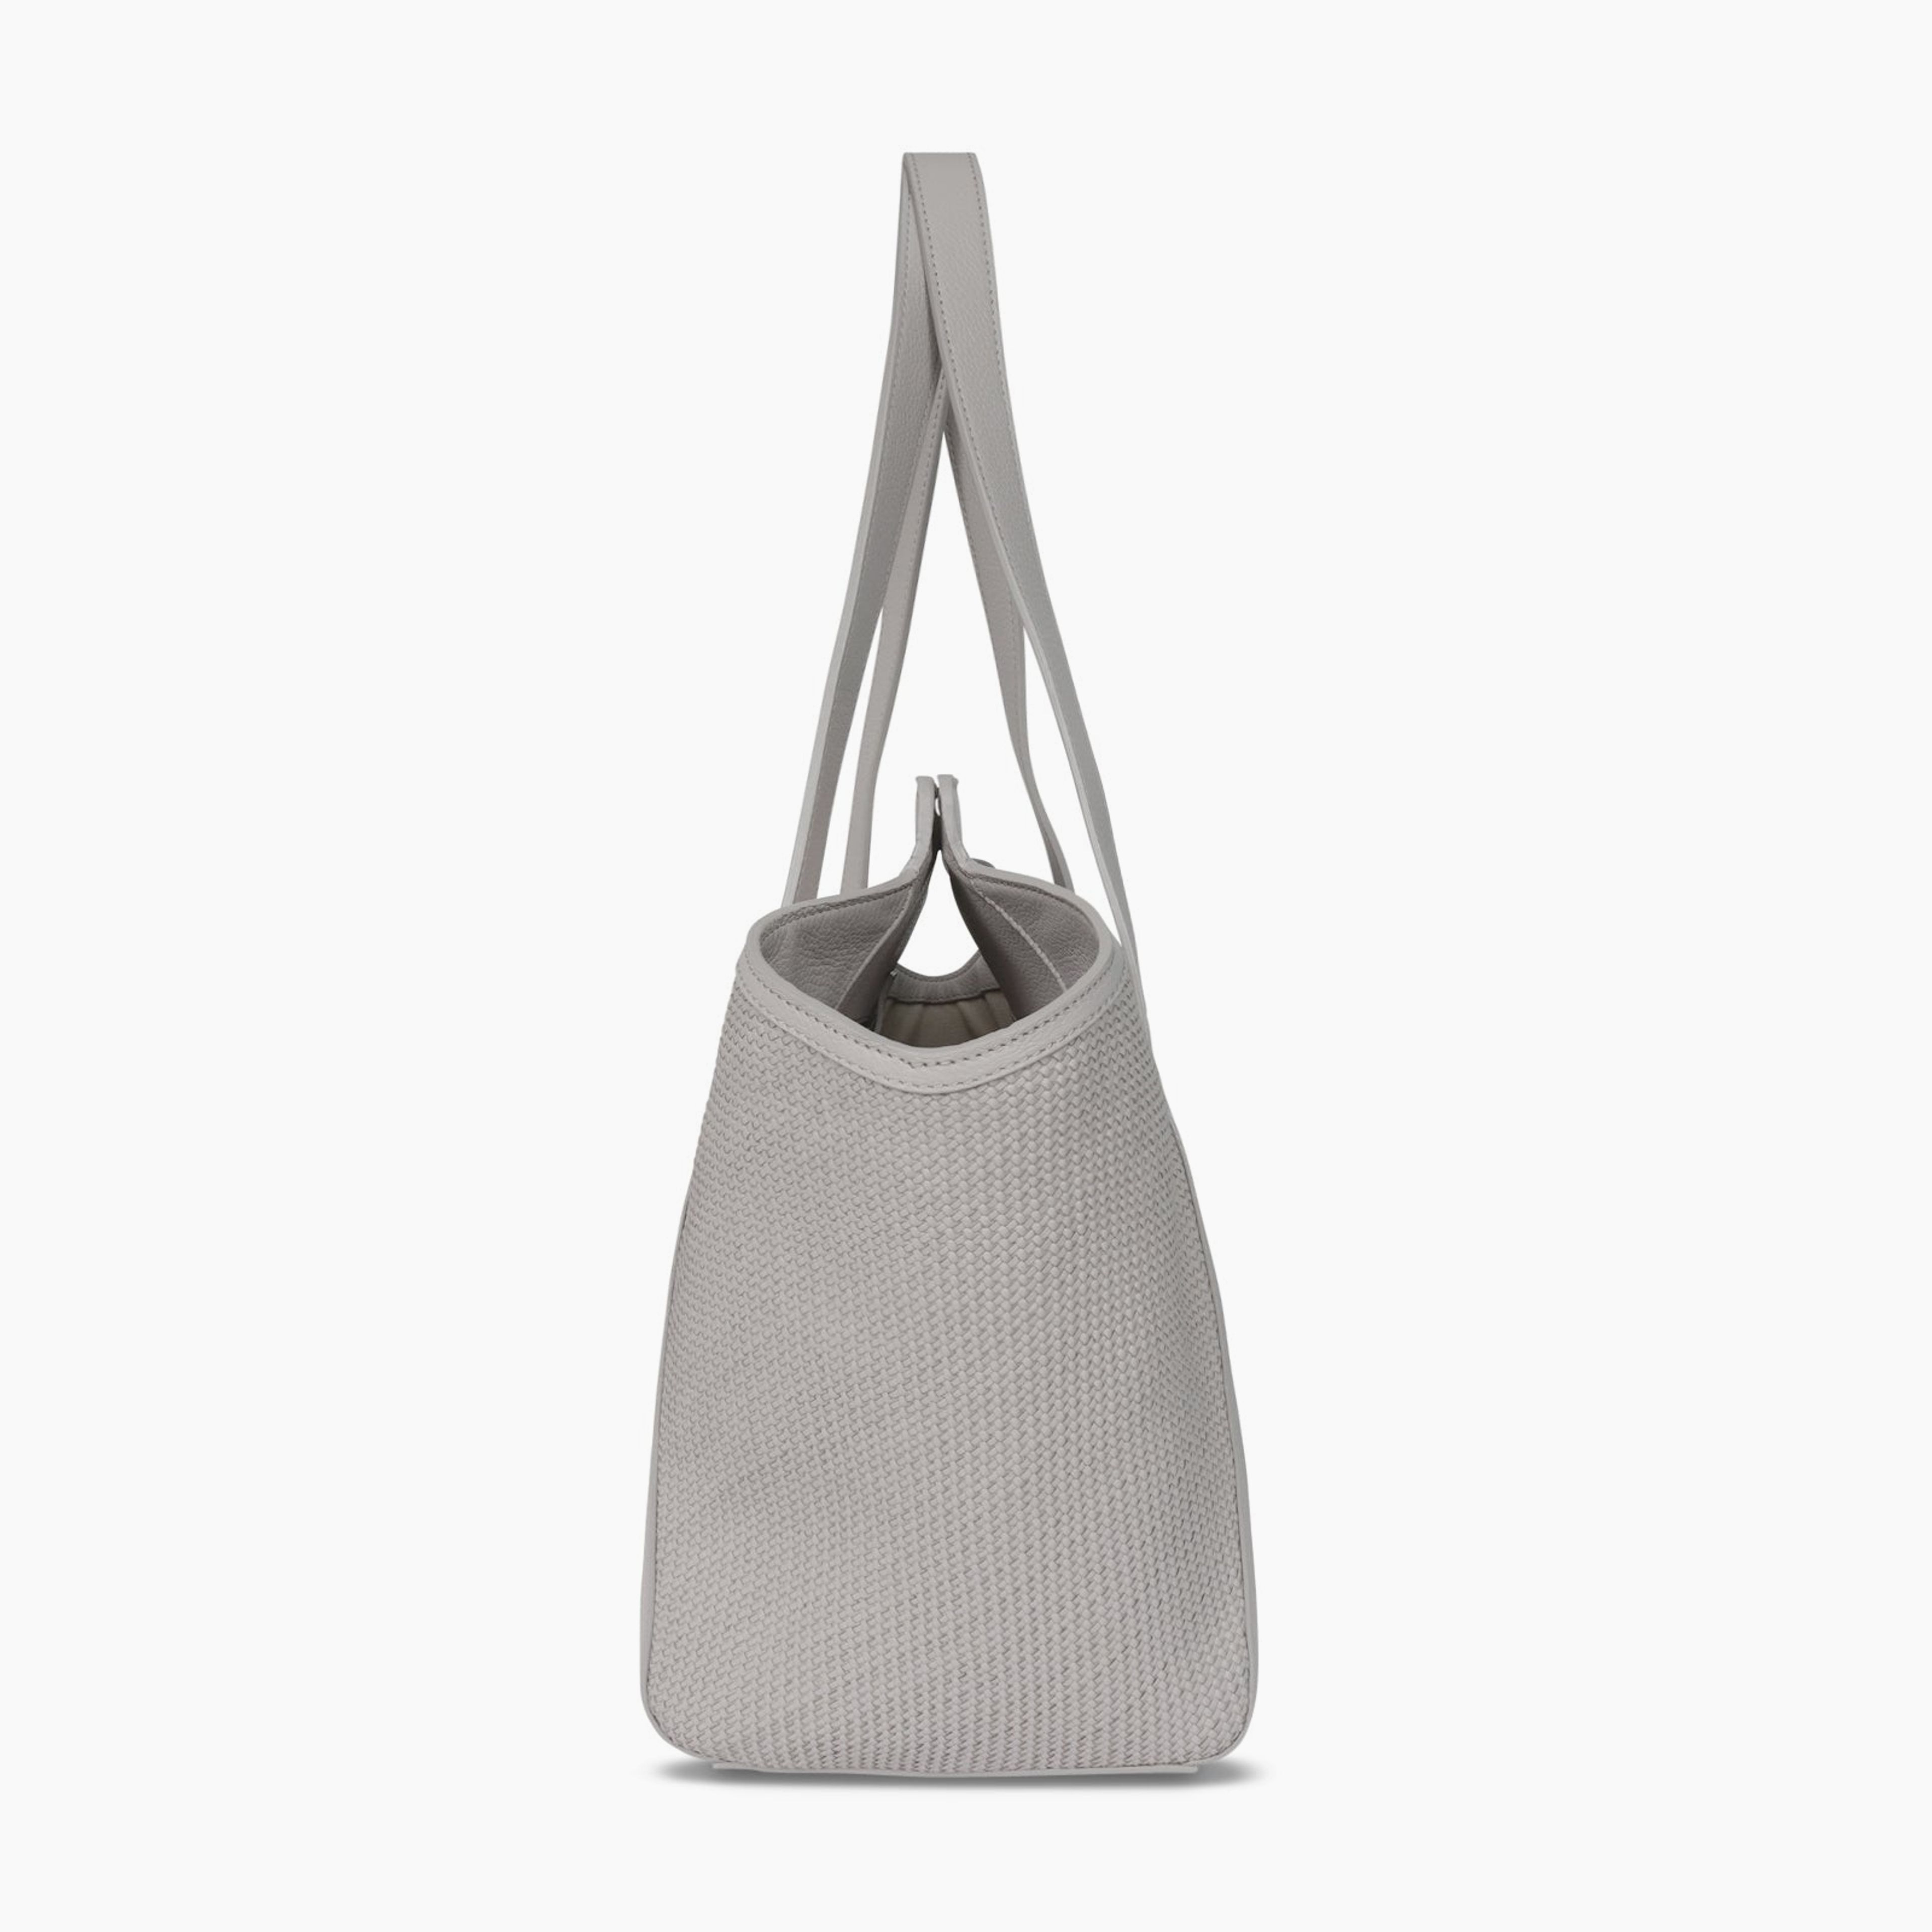 The Jeanne Tote